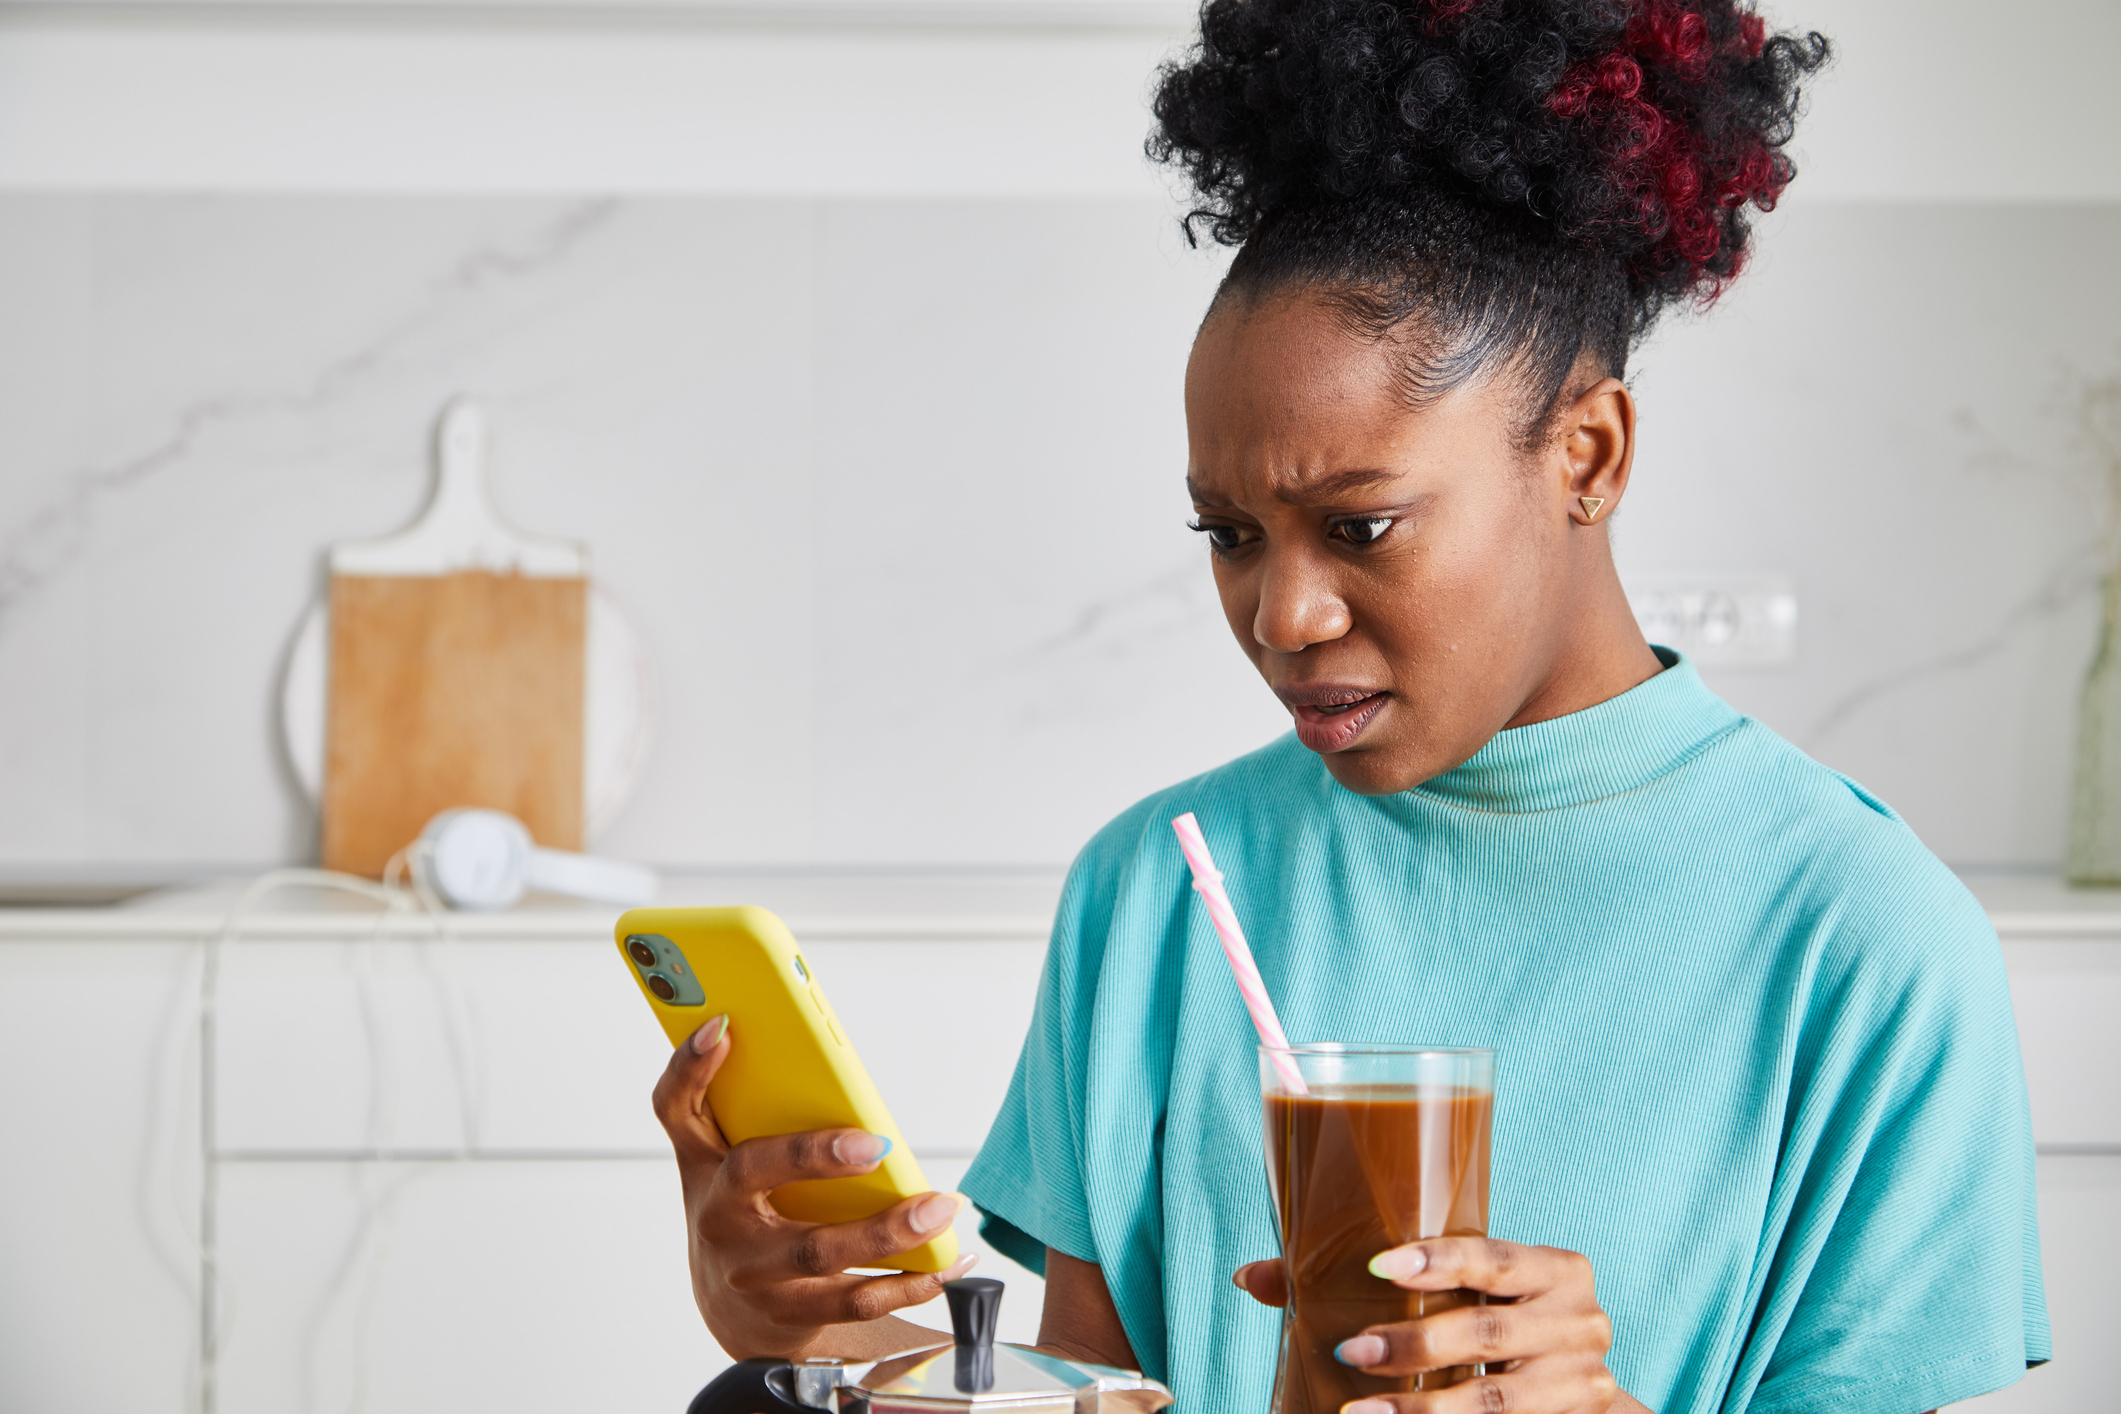 Woman in a turquoise top holds a yellow phone and a glass of iced coffee, looking at the phone with a concerned expression